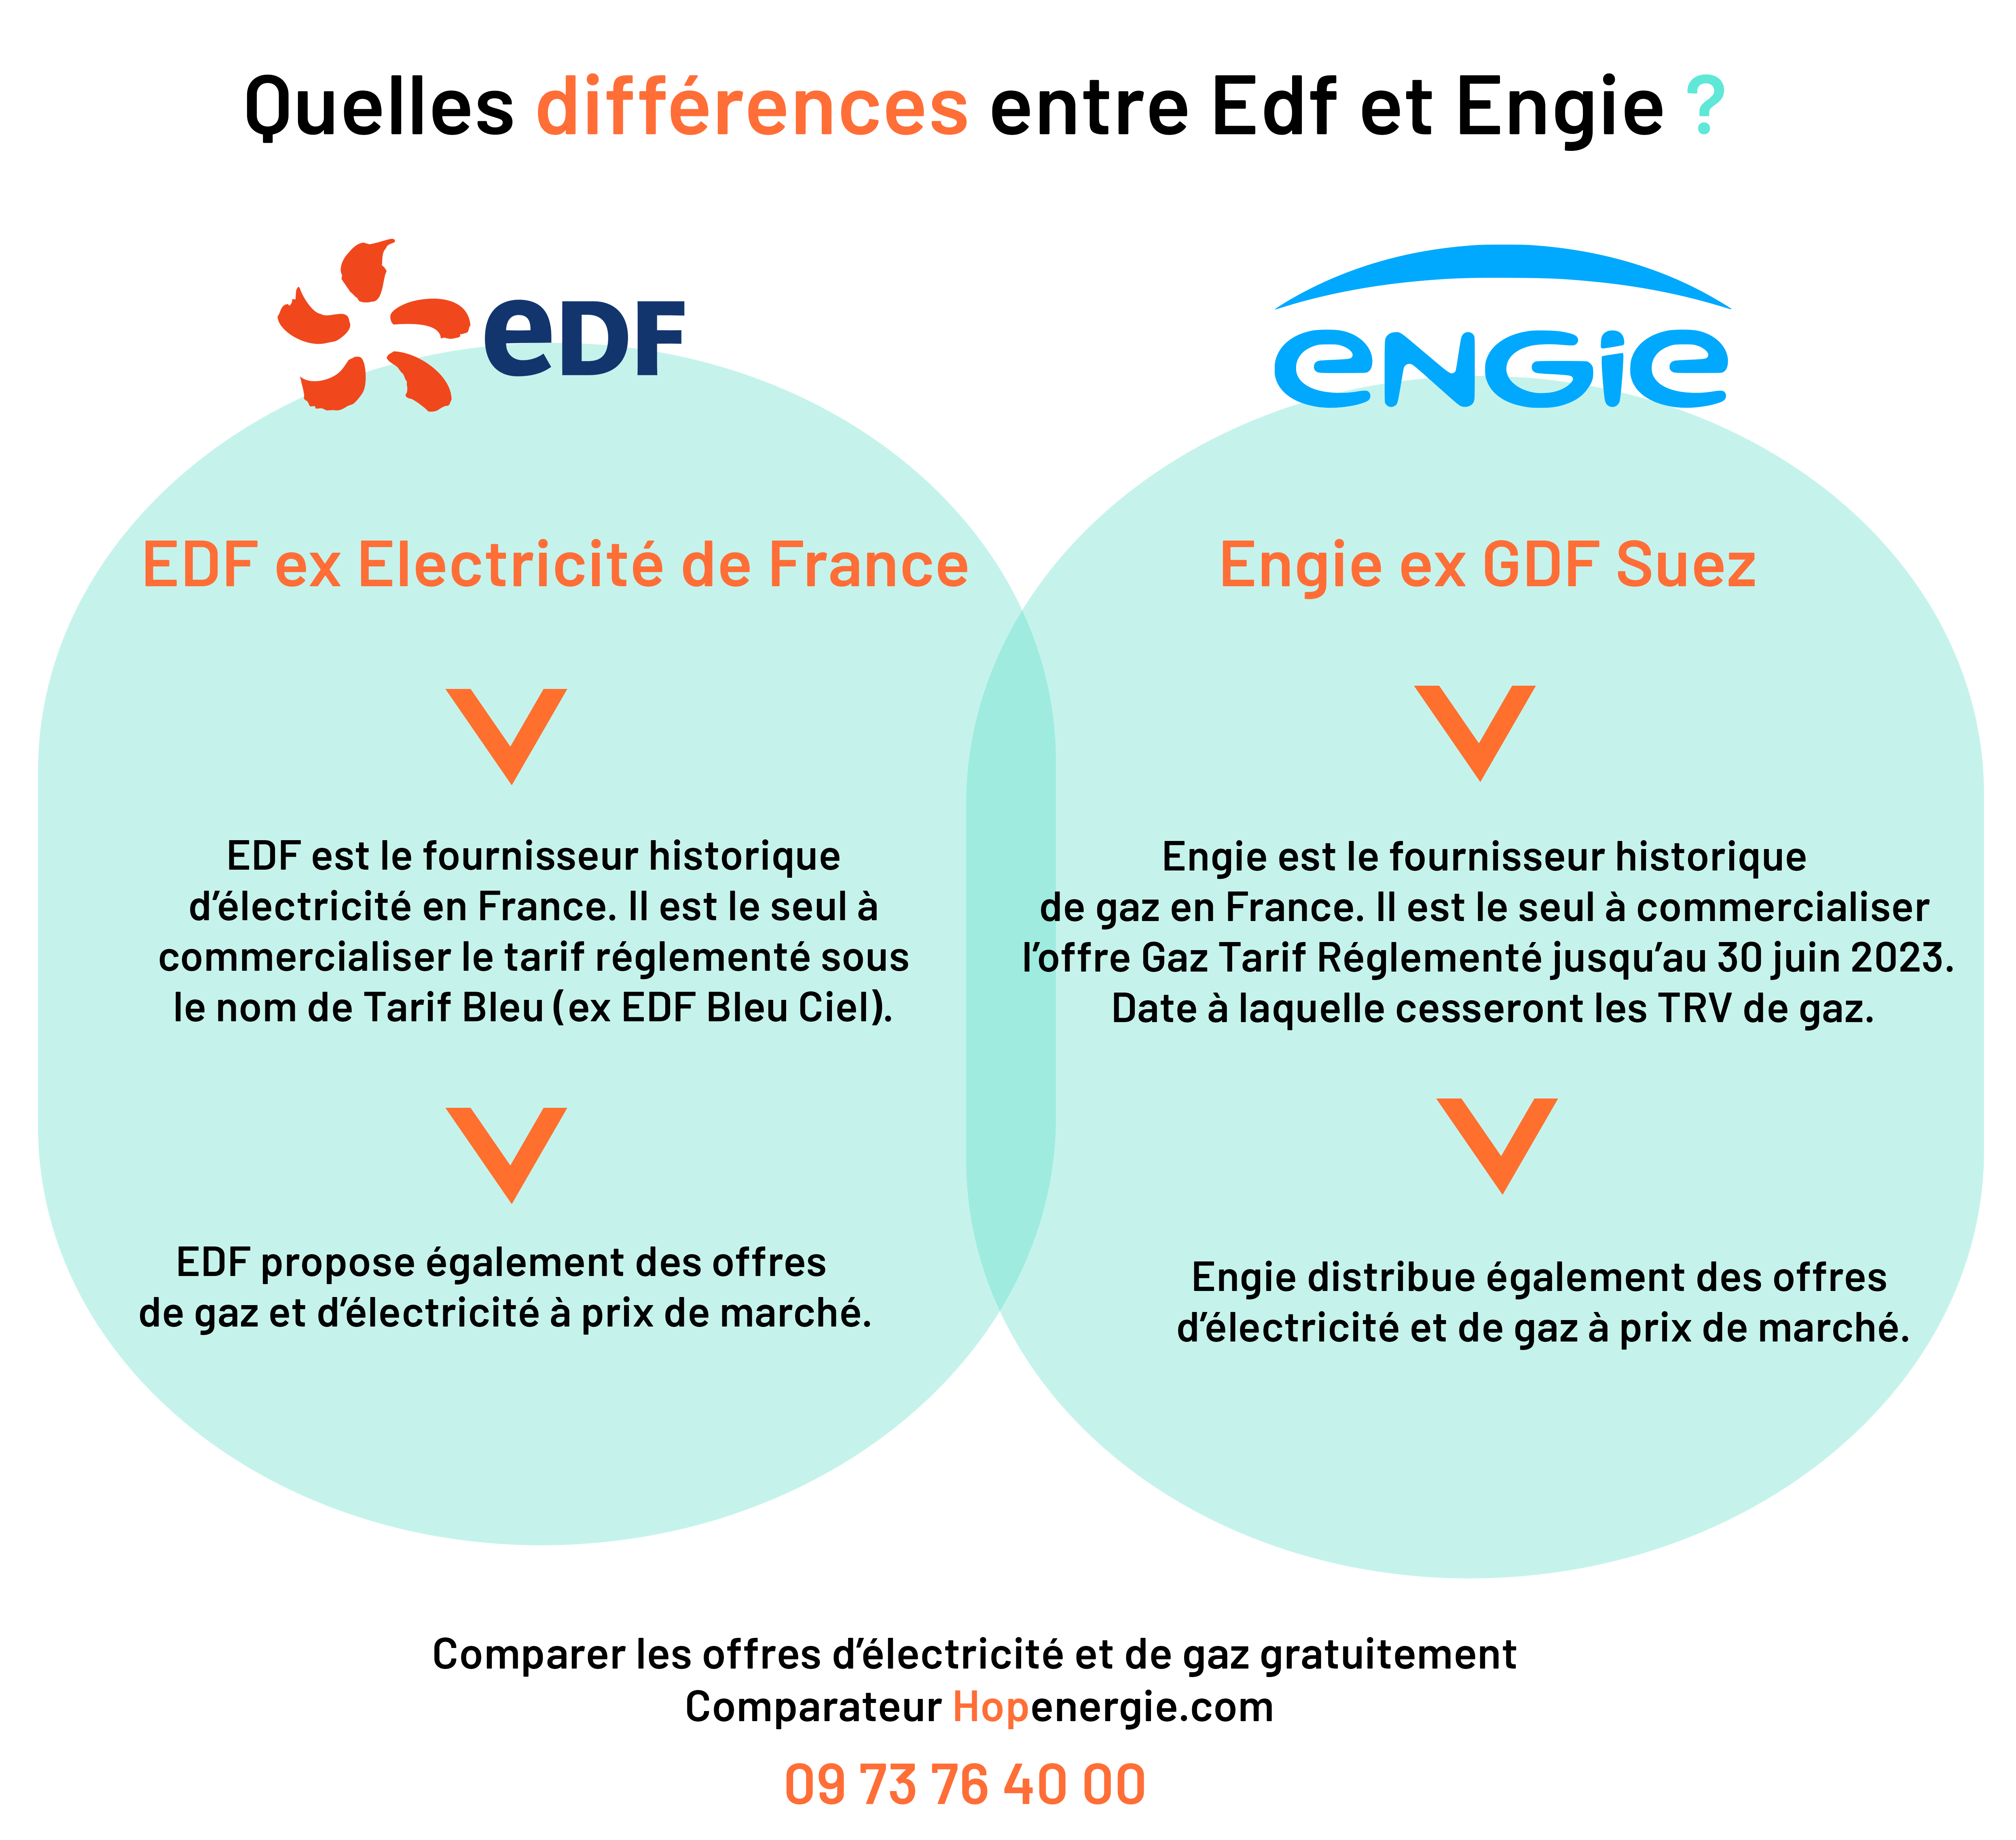 Difference entre edf et engie : Hopenergie